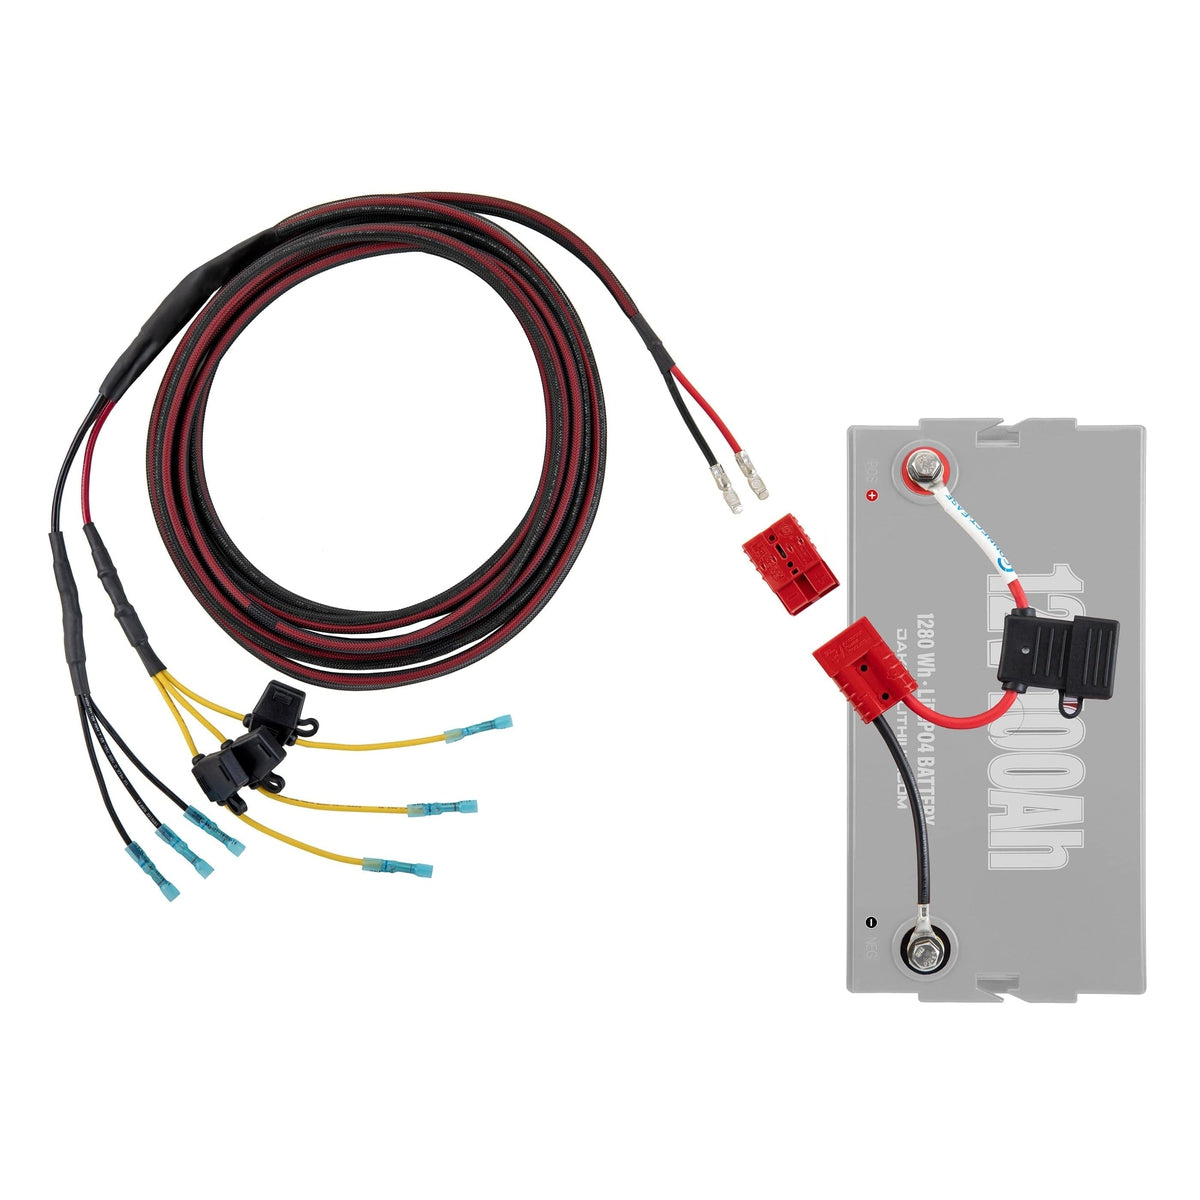 Connect-Ease Qualifies for Free Shipping Connect-Ease Connect-Ease RCE12VGRPTLR Graph Power Rear Tiller Model #RCE12VGRPTLR